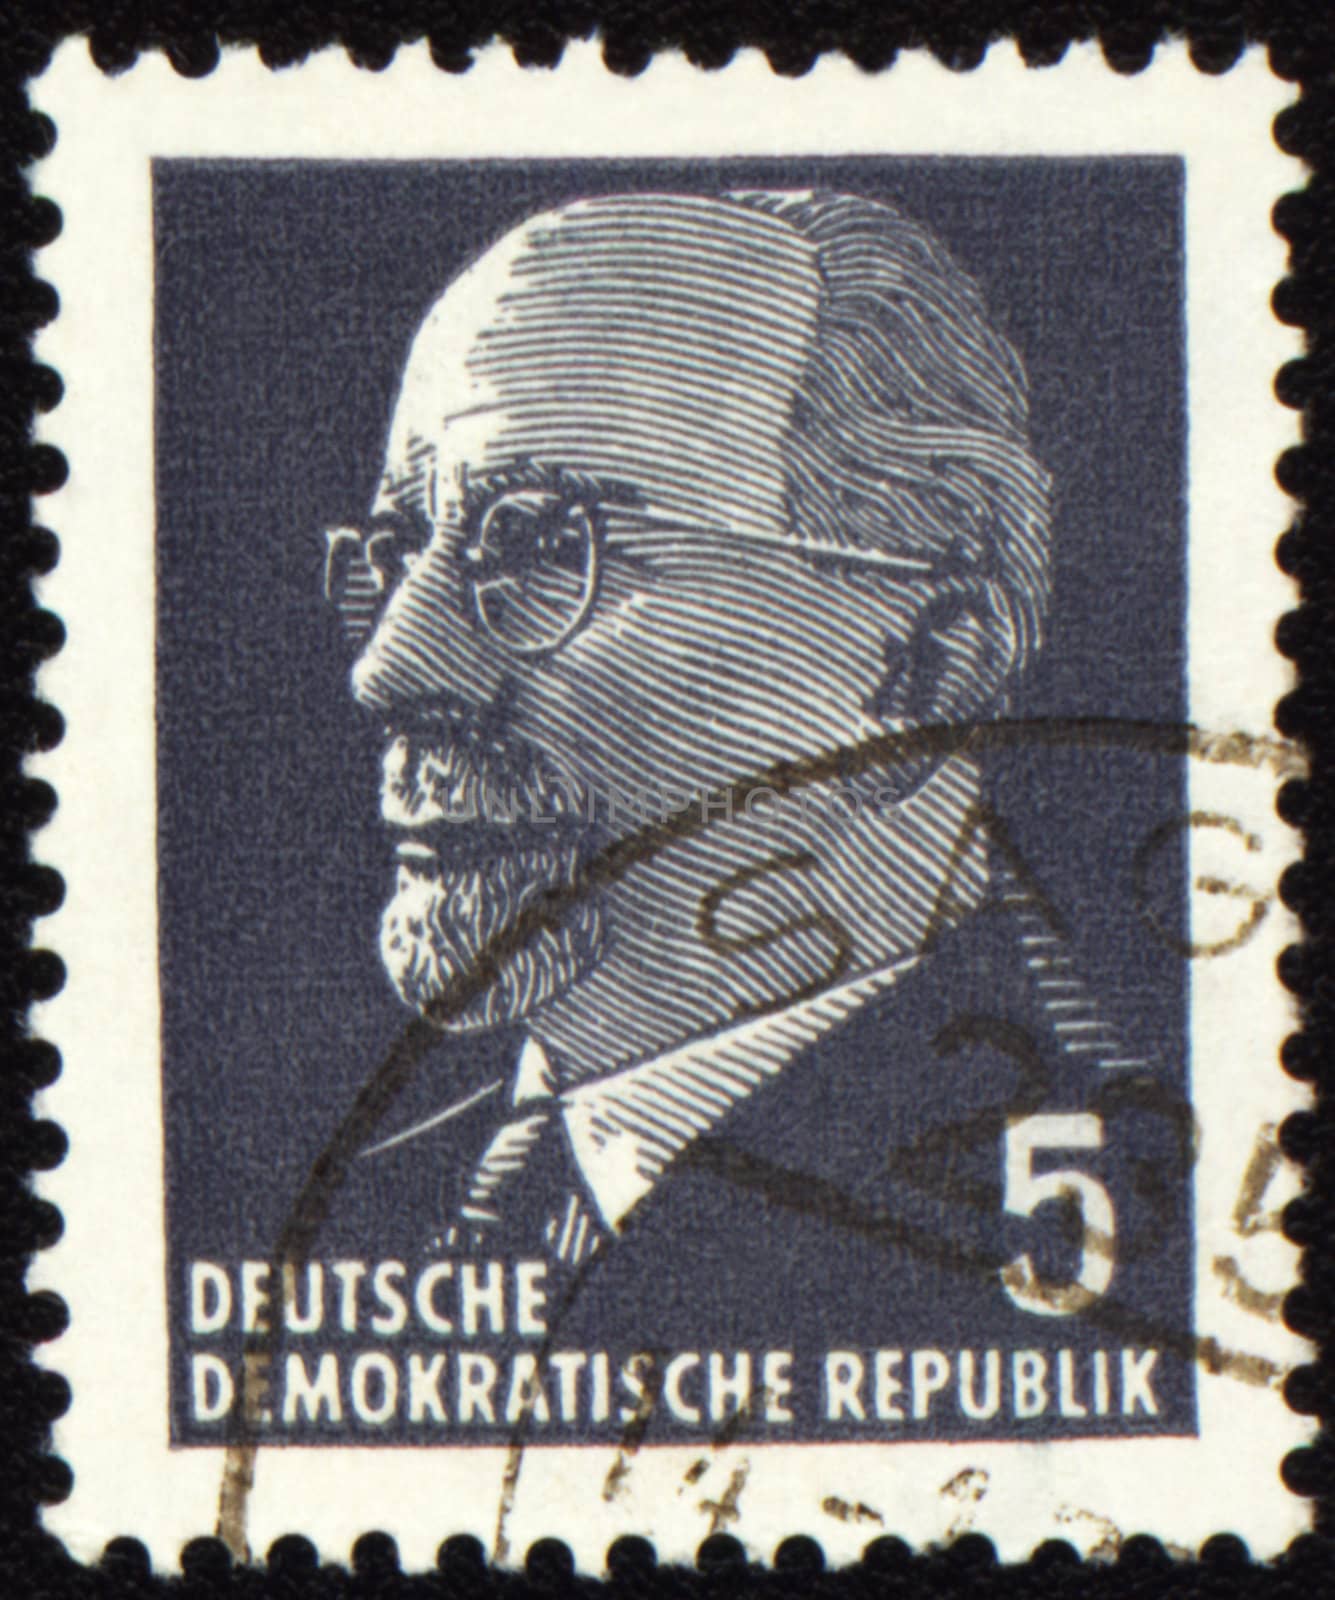 GDR - CIRCA 1971: A stamp printed in GDR (East Germany) shows Chairman Walter Ulbricht portrait, circa 1971